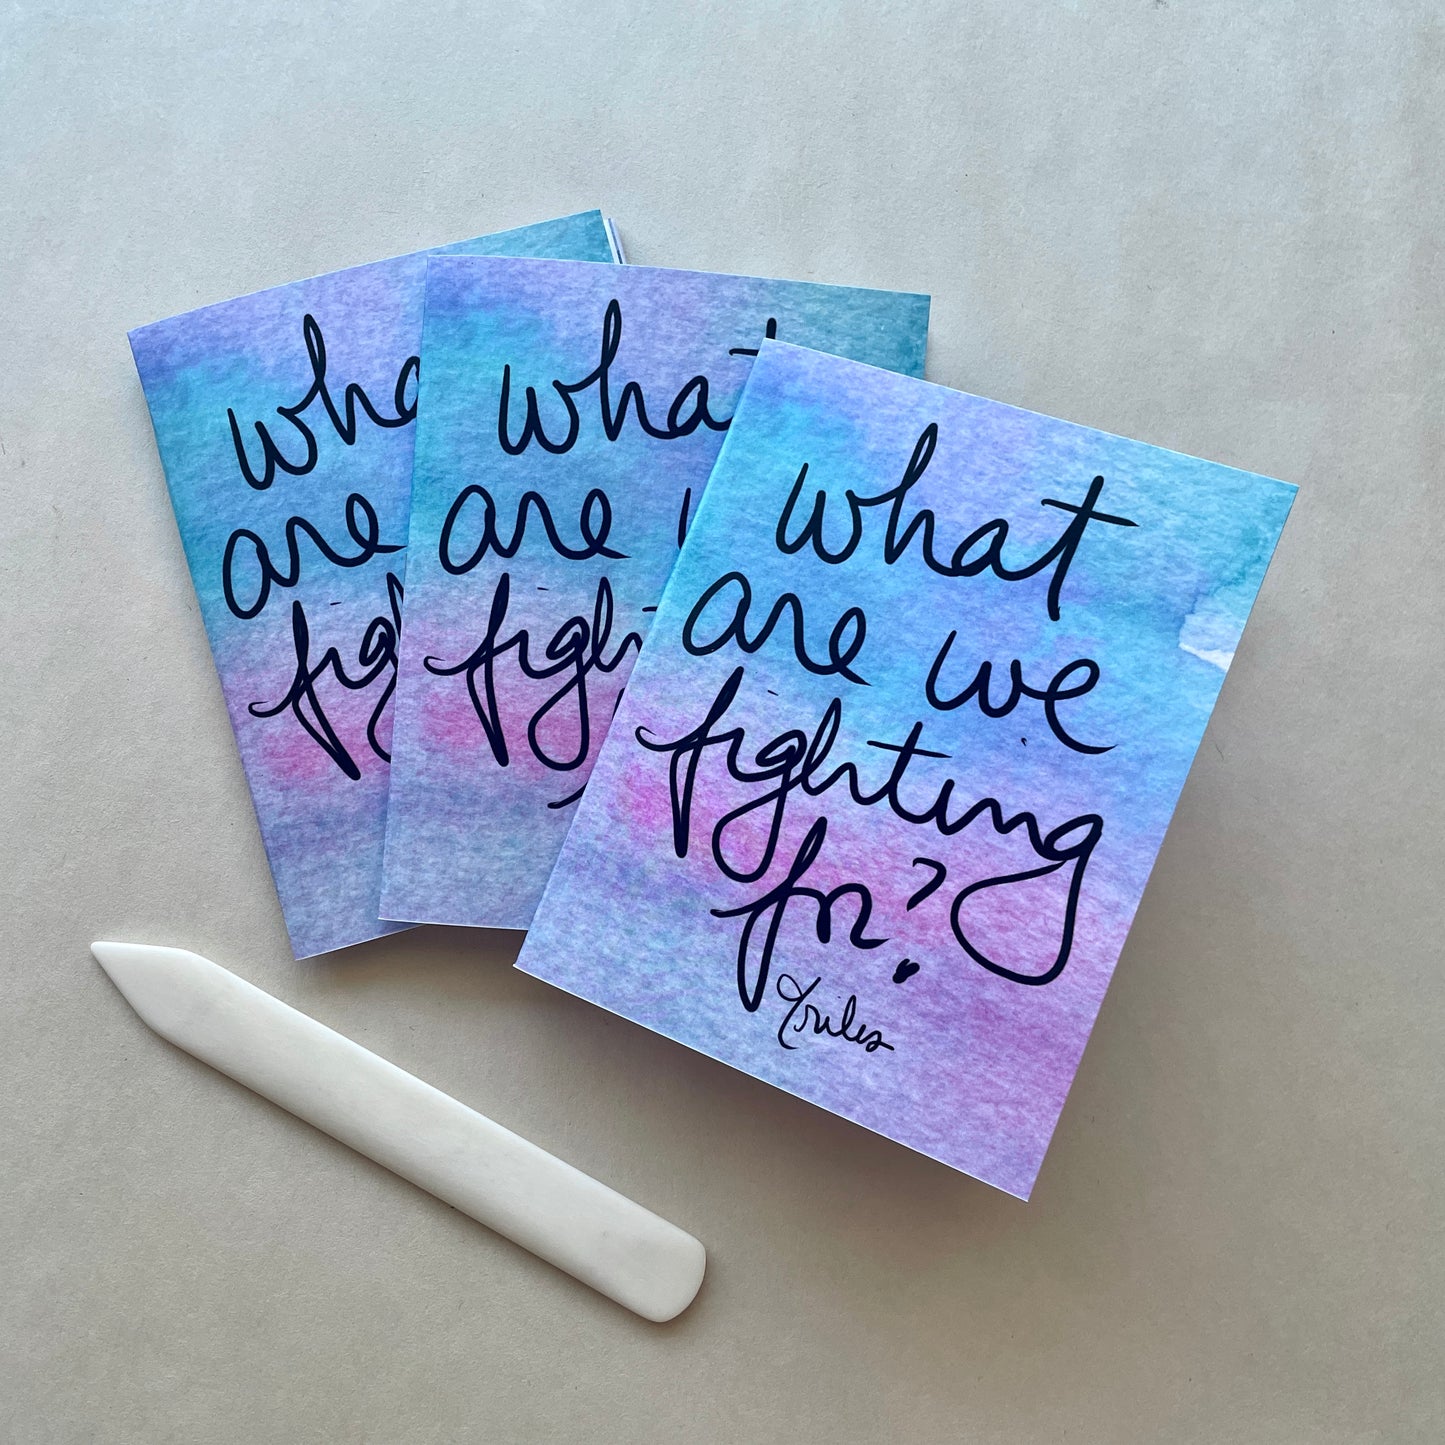 what are we fighting for? - Chapbook